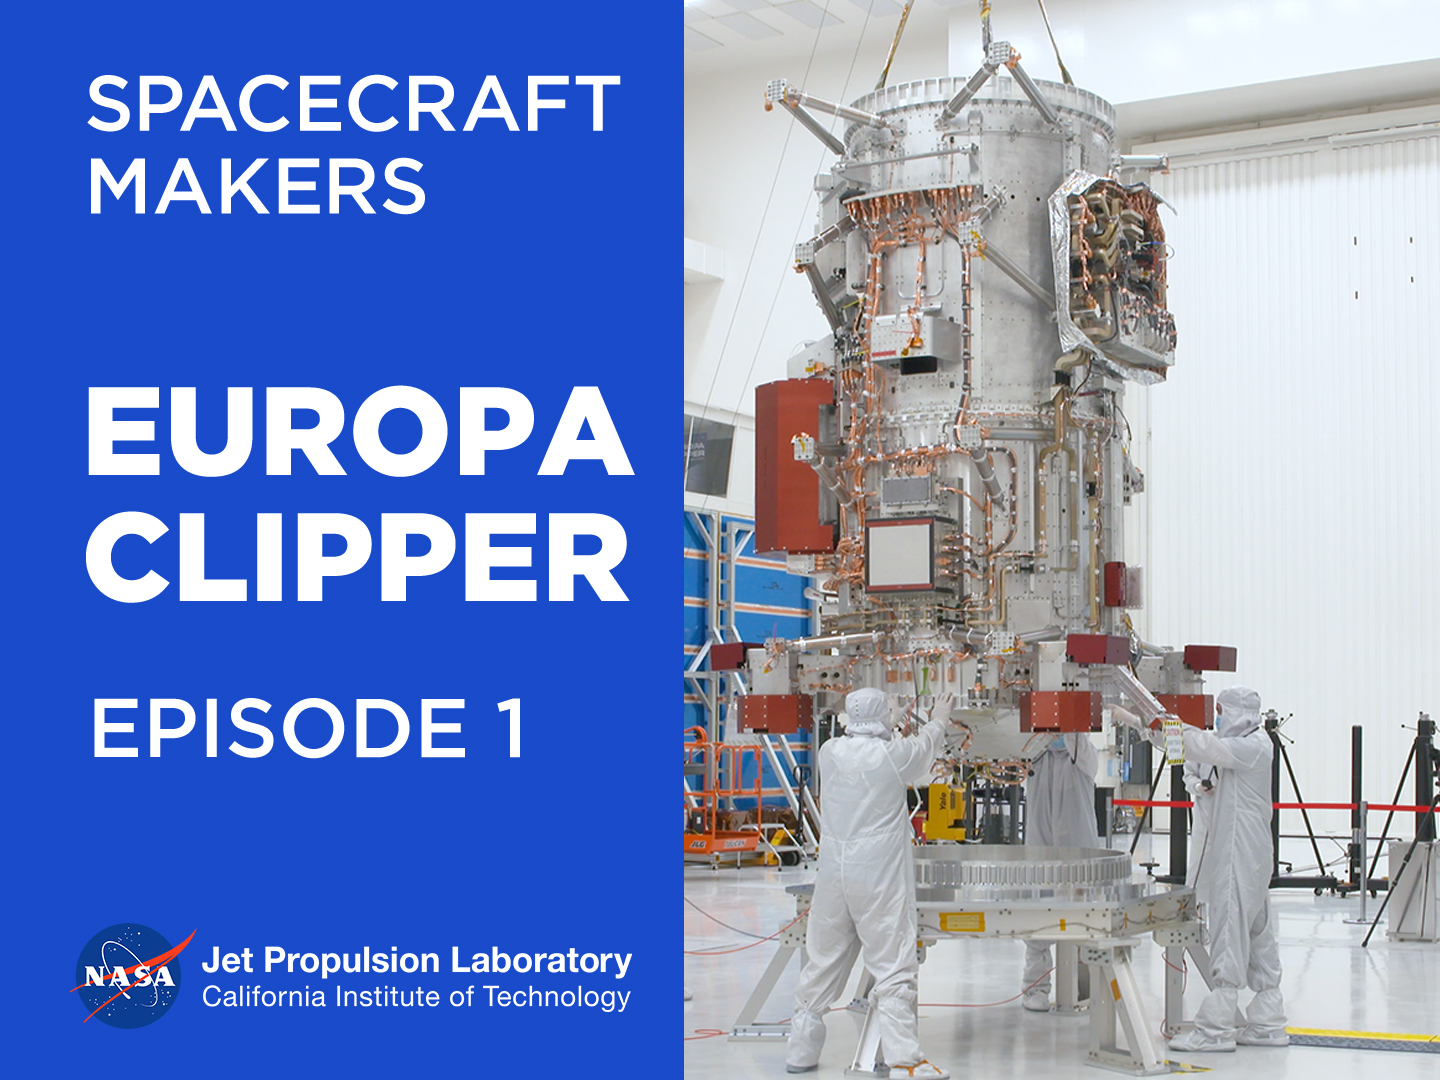 Spacecraft Makers: Introducing Europa Clipper